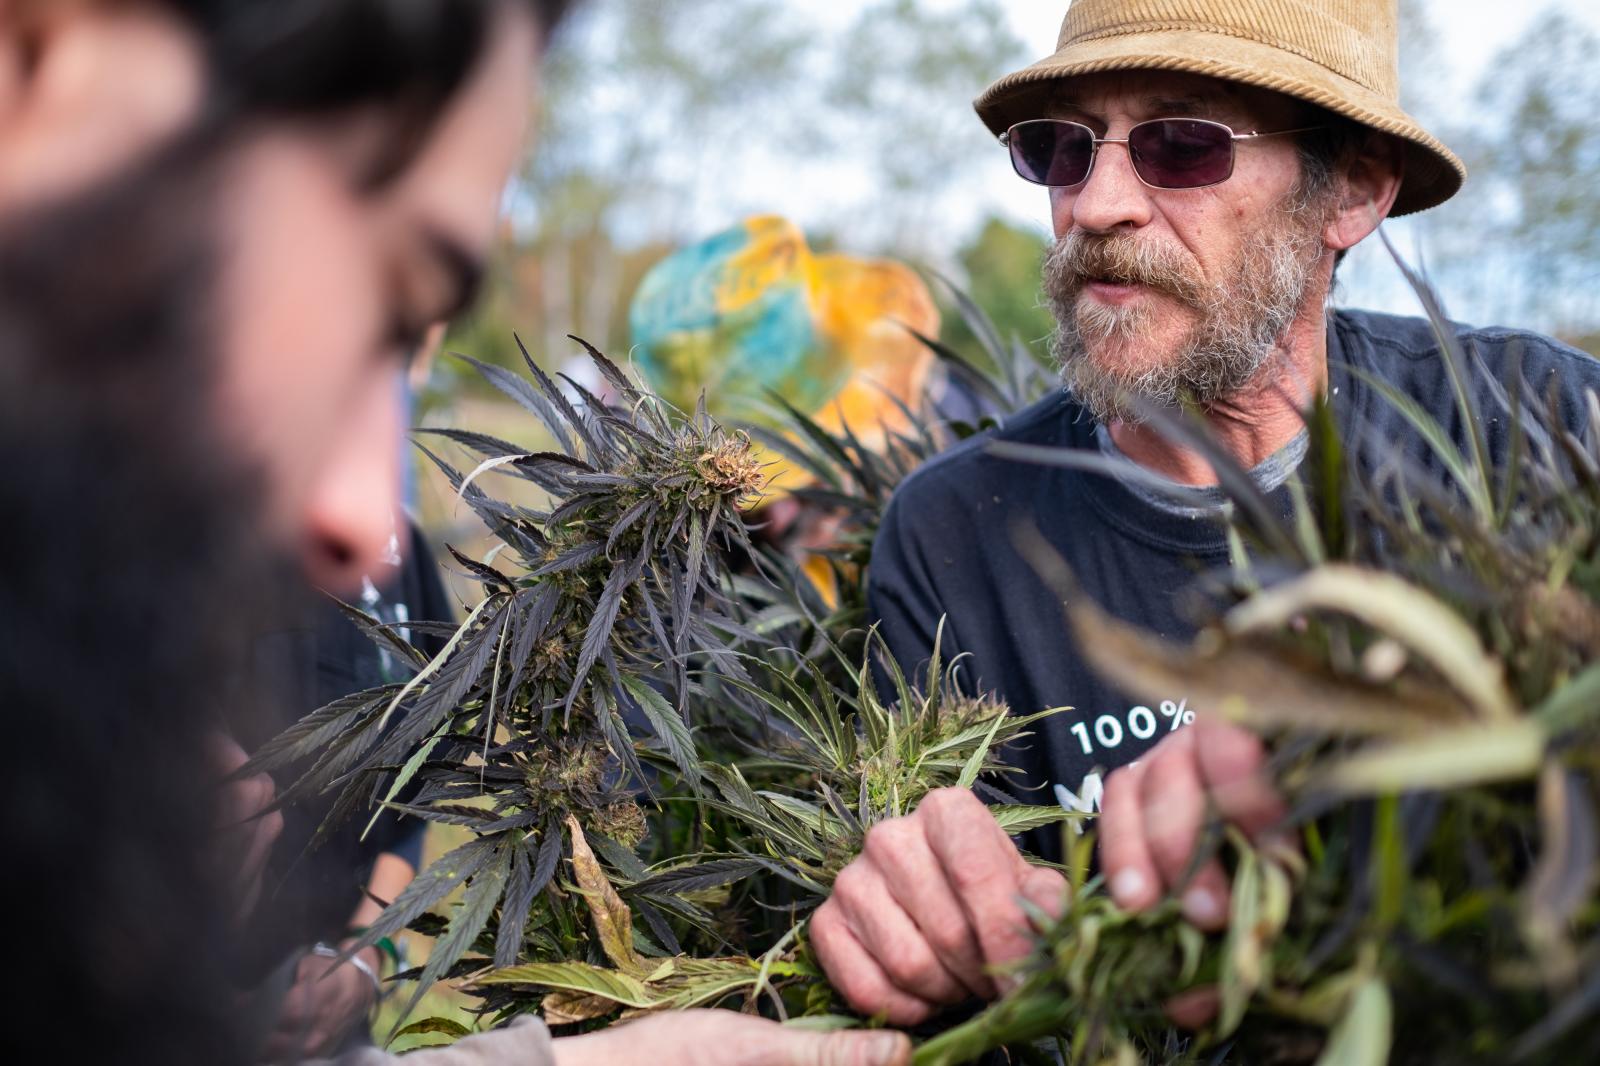 Image from CNY Hemp Festival - George Knarich discusses the plants with Zach Howard, a...